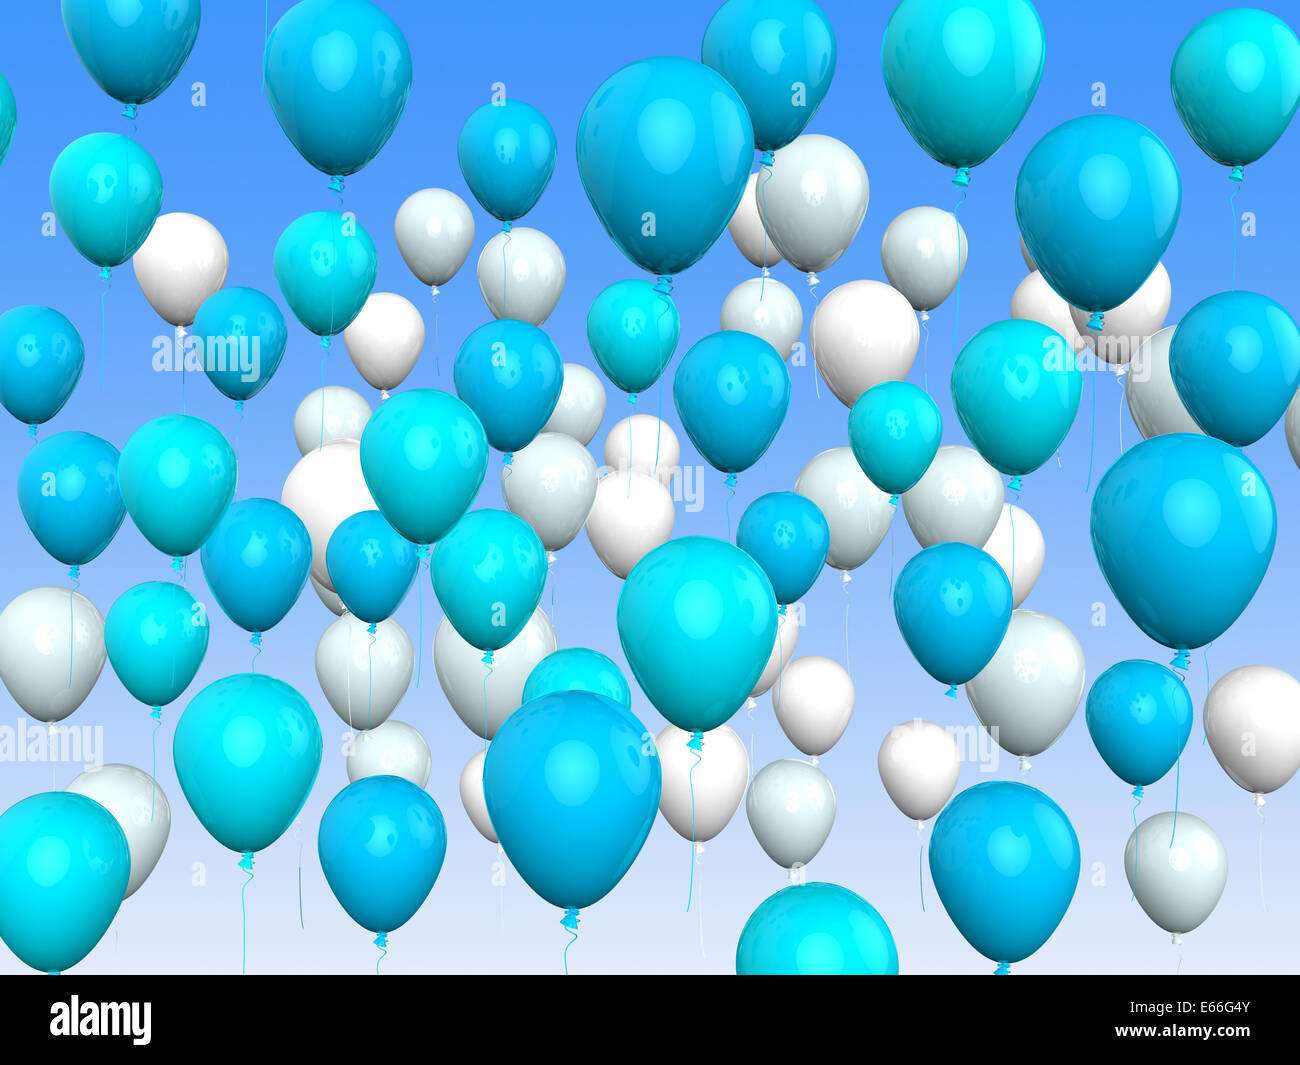 Floating Light Blue And White Balloons Meaning Argentinean Flag Or Festival  Stock Photo - Alamy